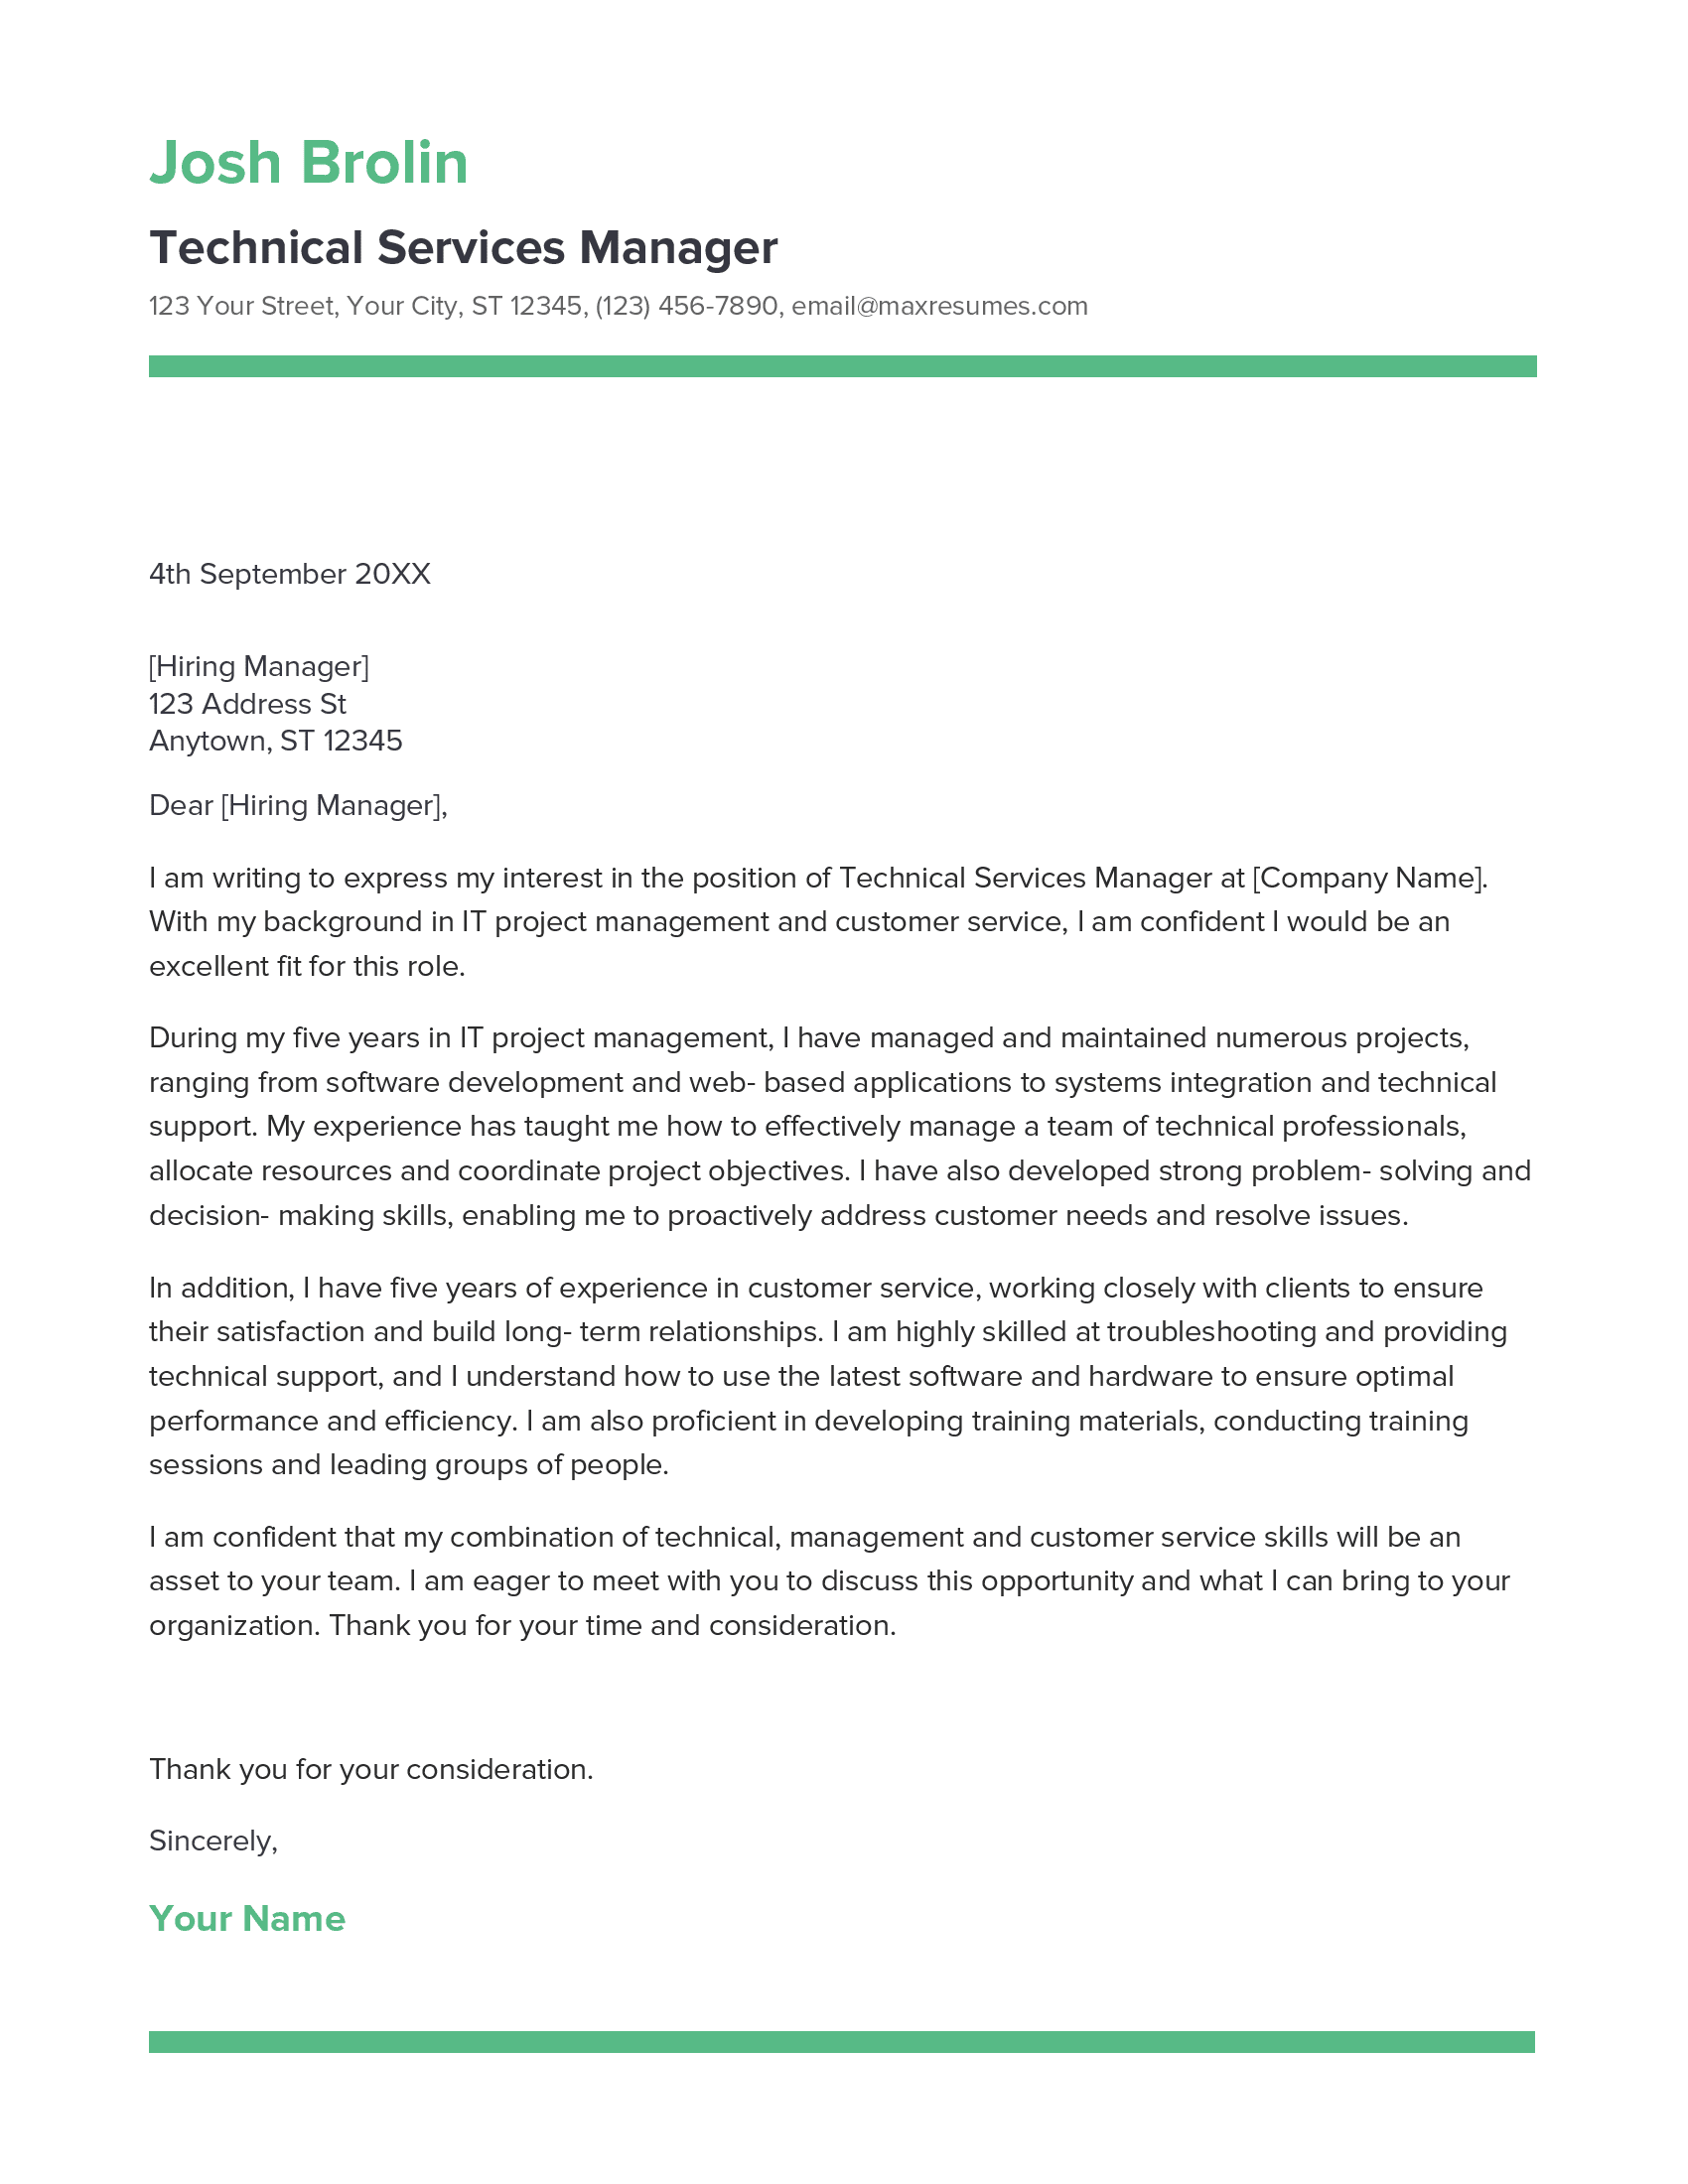 Technical Services Manager Cover Letter Example